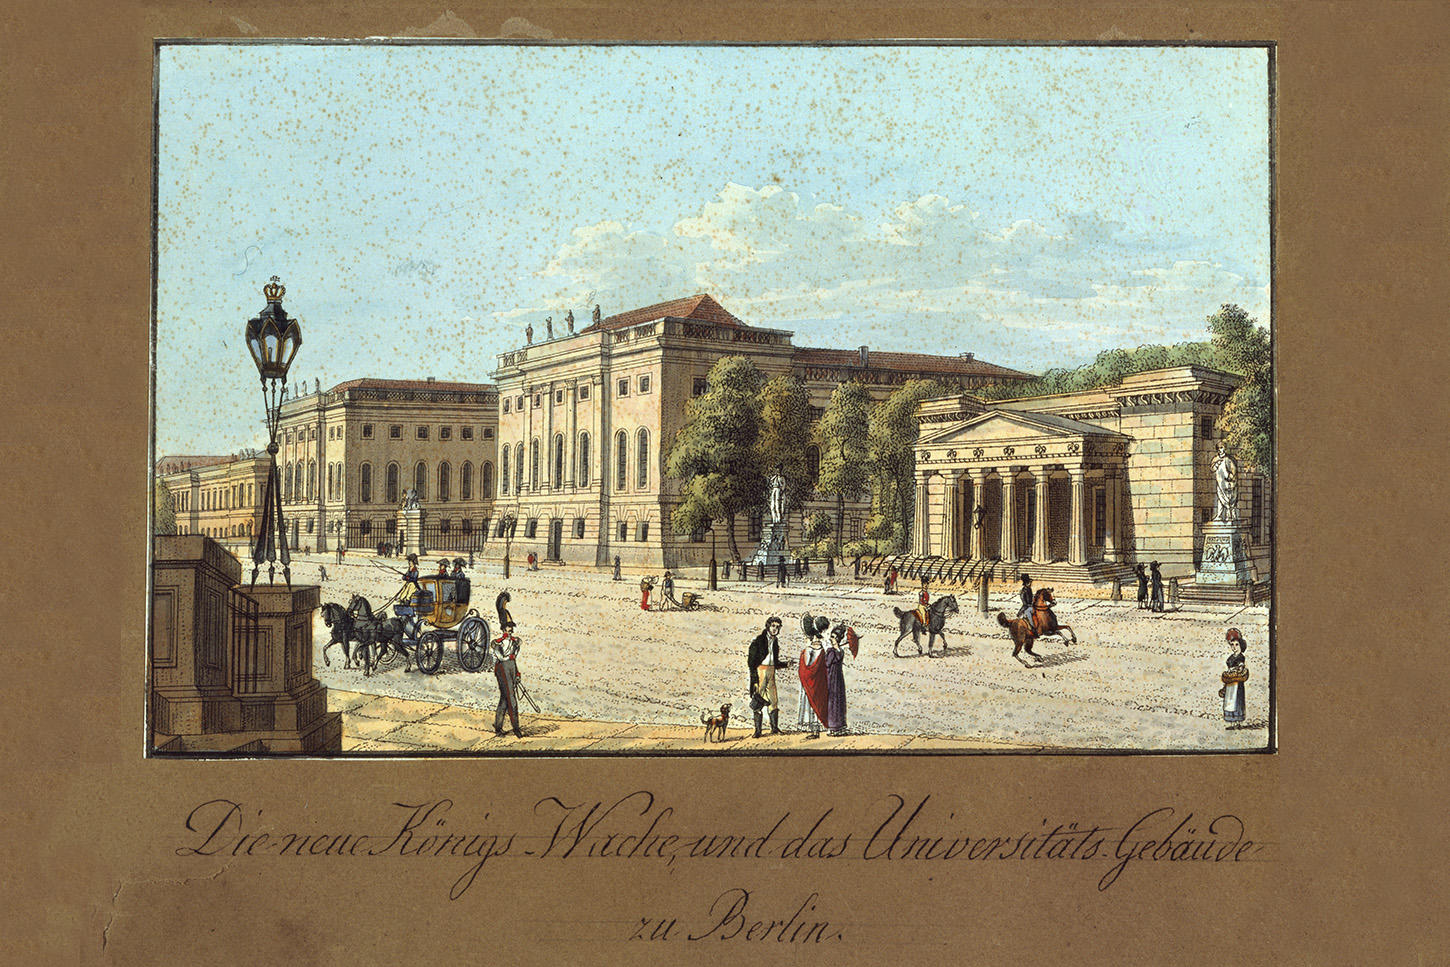 In the 19th century, Berlin University moved into the Prinz-Heinrich-Palais, directly adjacent to the Neue Wache, which is still today the main building of Humboldt-Universität.